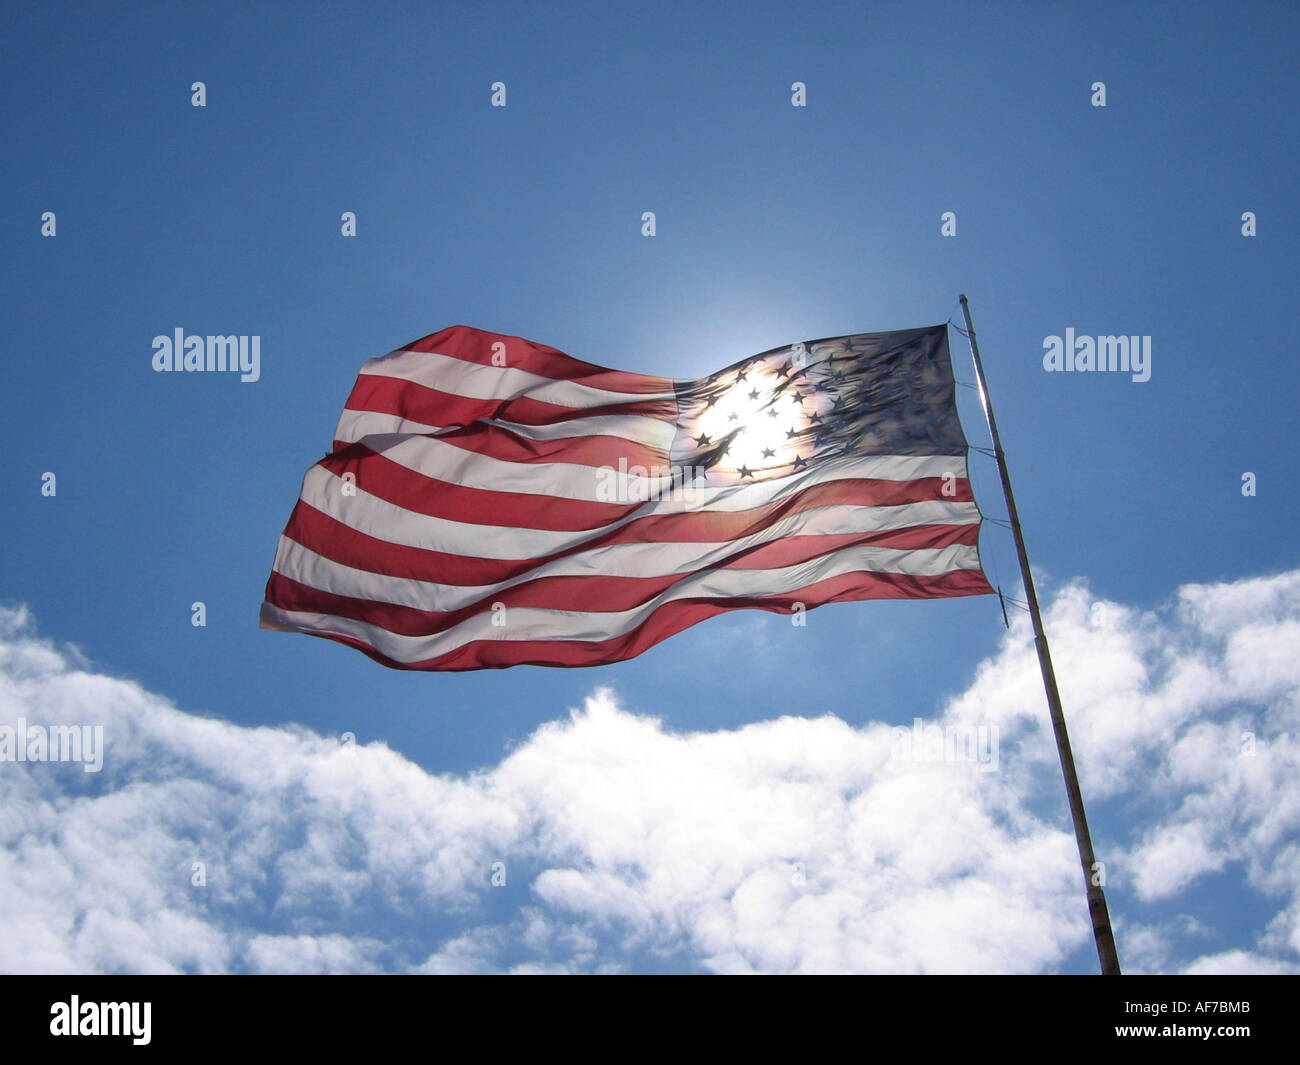 USA stars and stripes national flag against blue sky with band of white clouds. Stock Photo